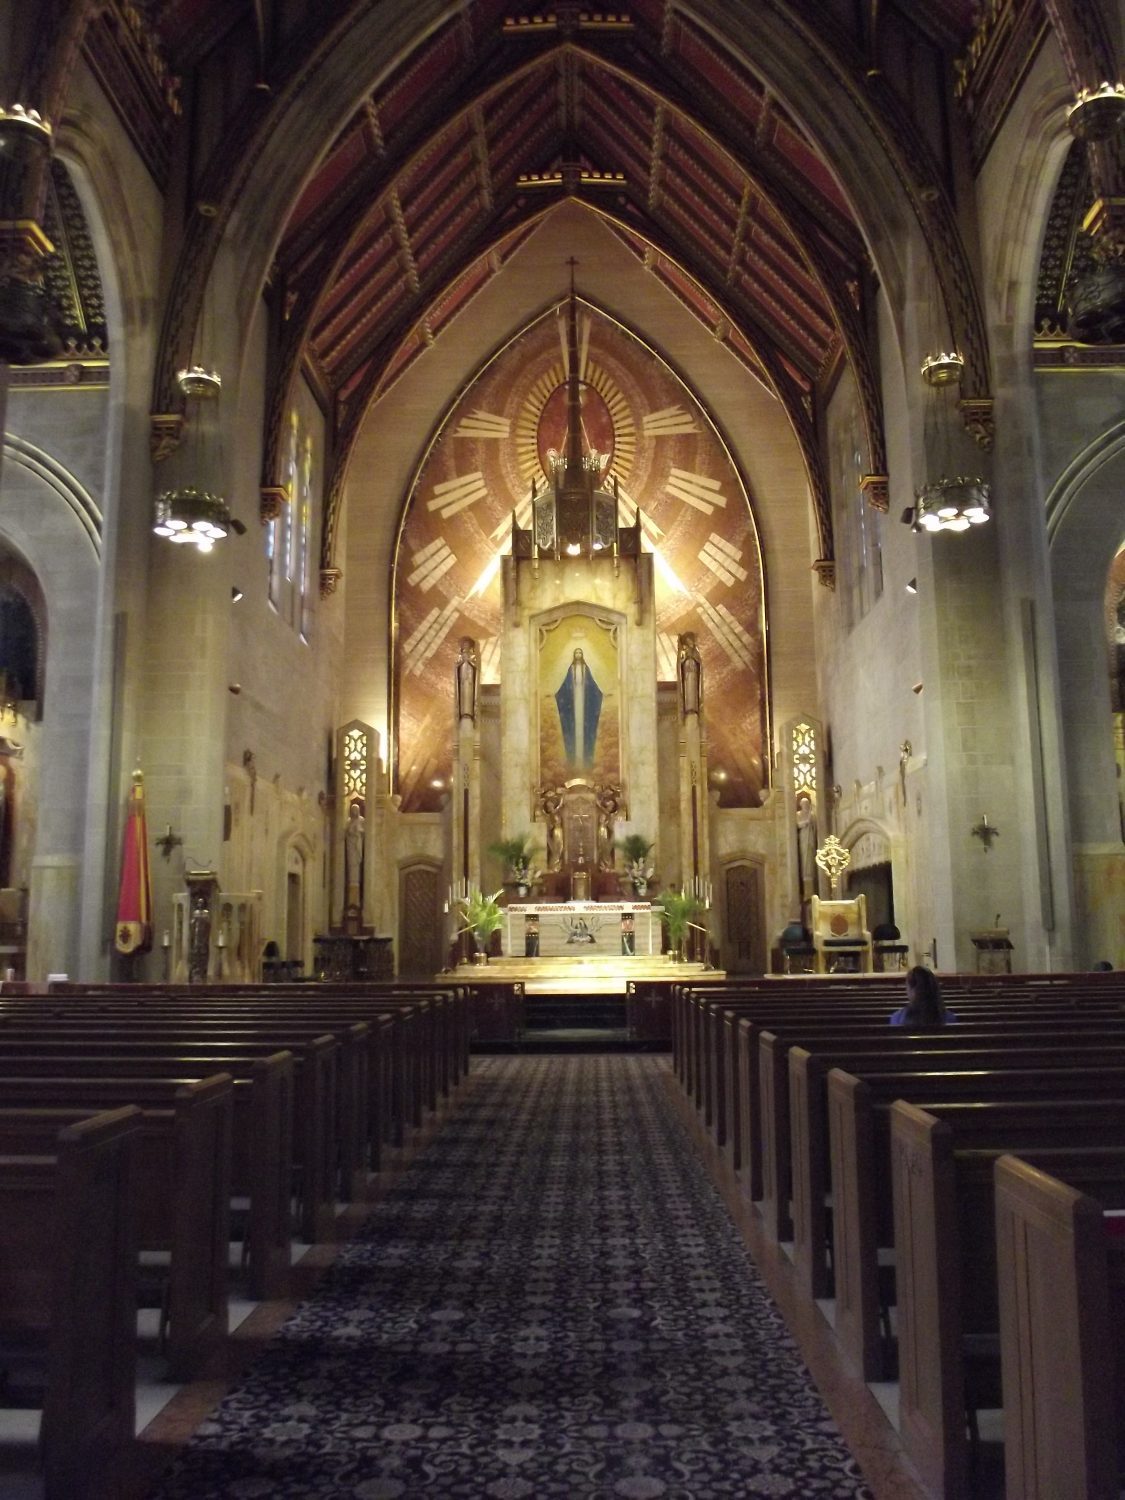 Painting Services - Queen of All Saints Basilica, North Chicago